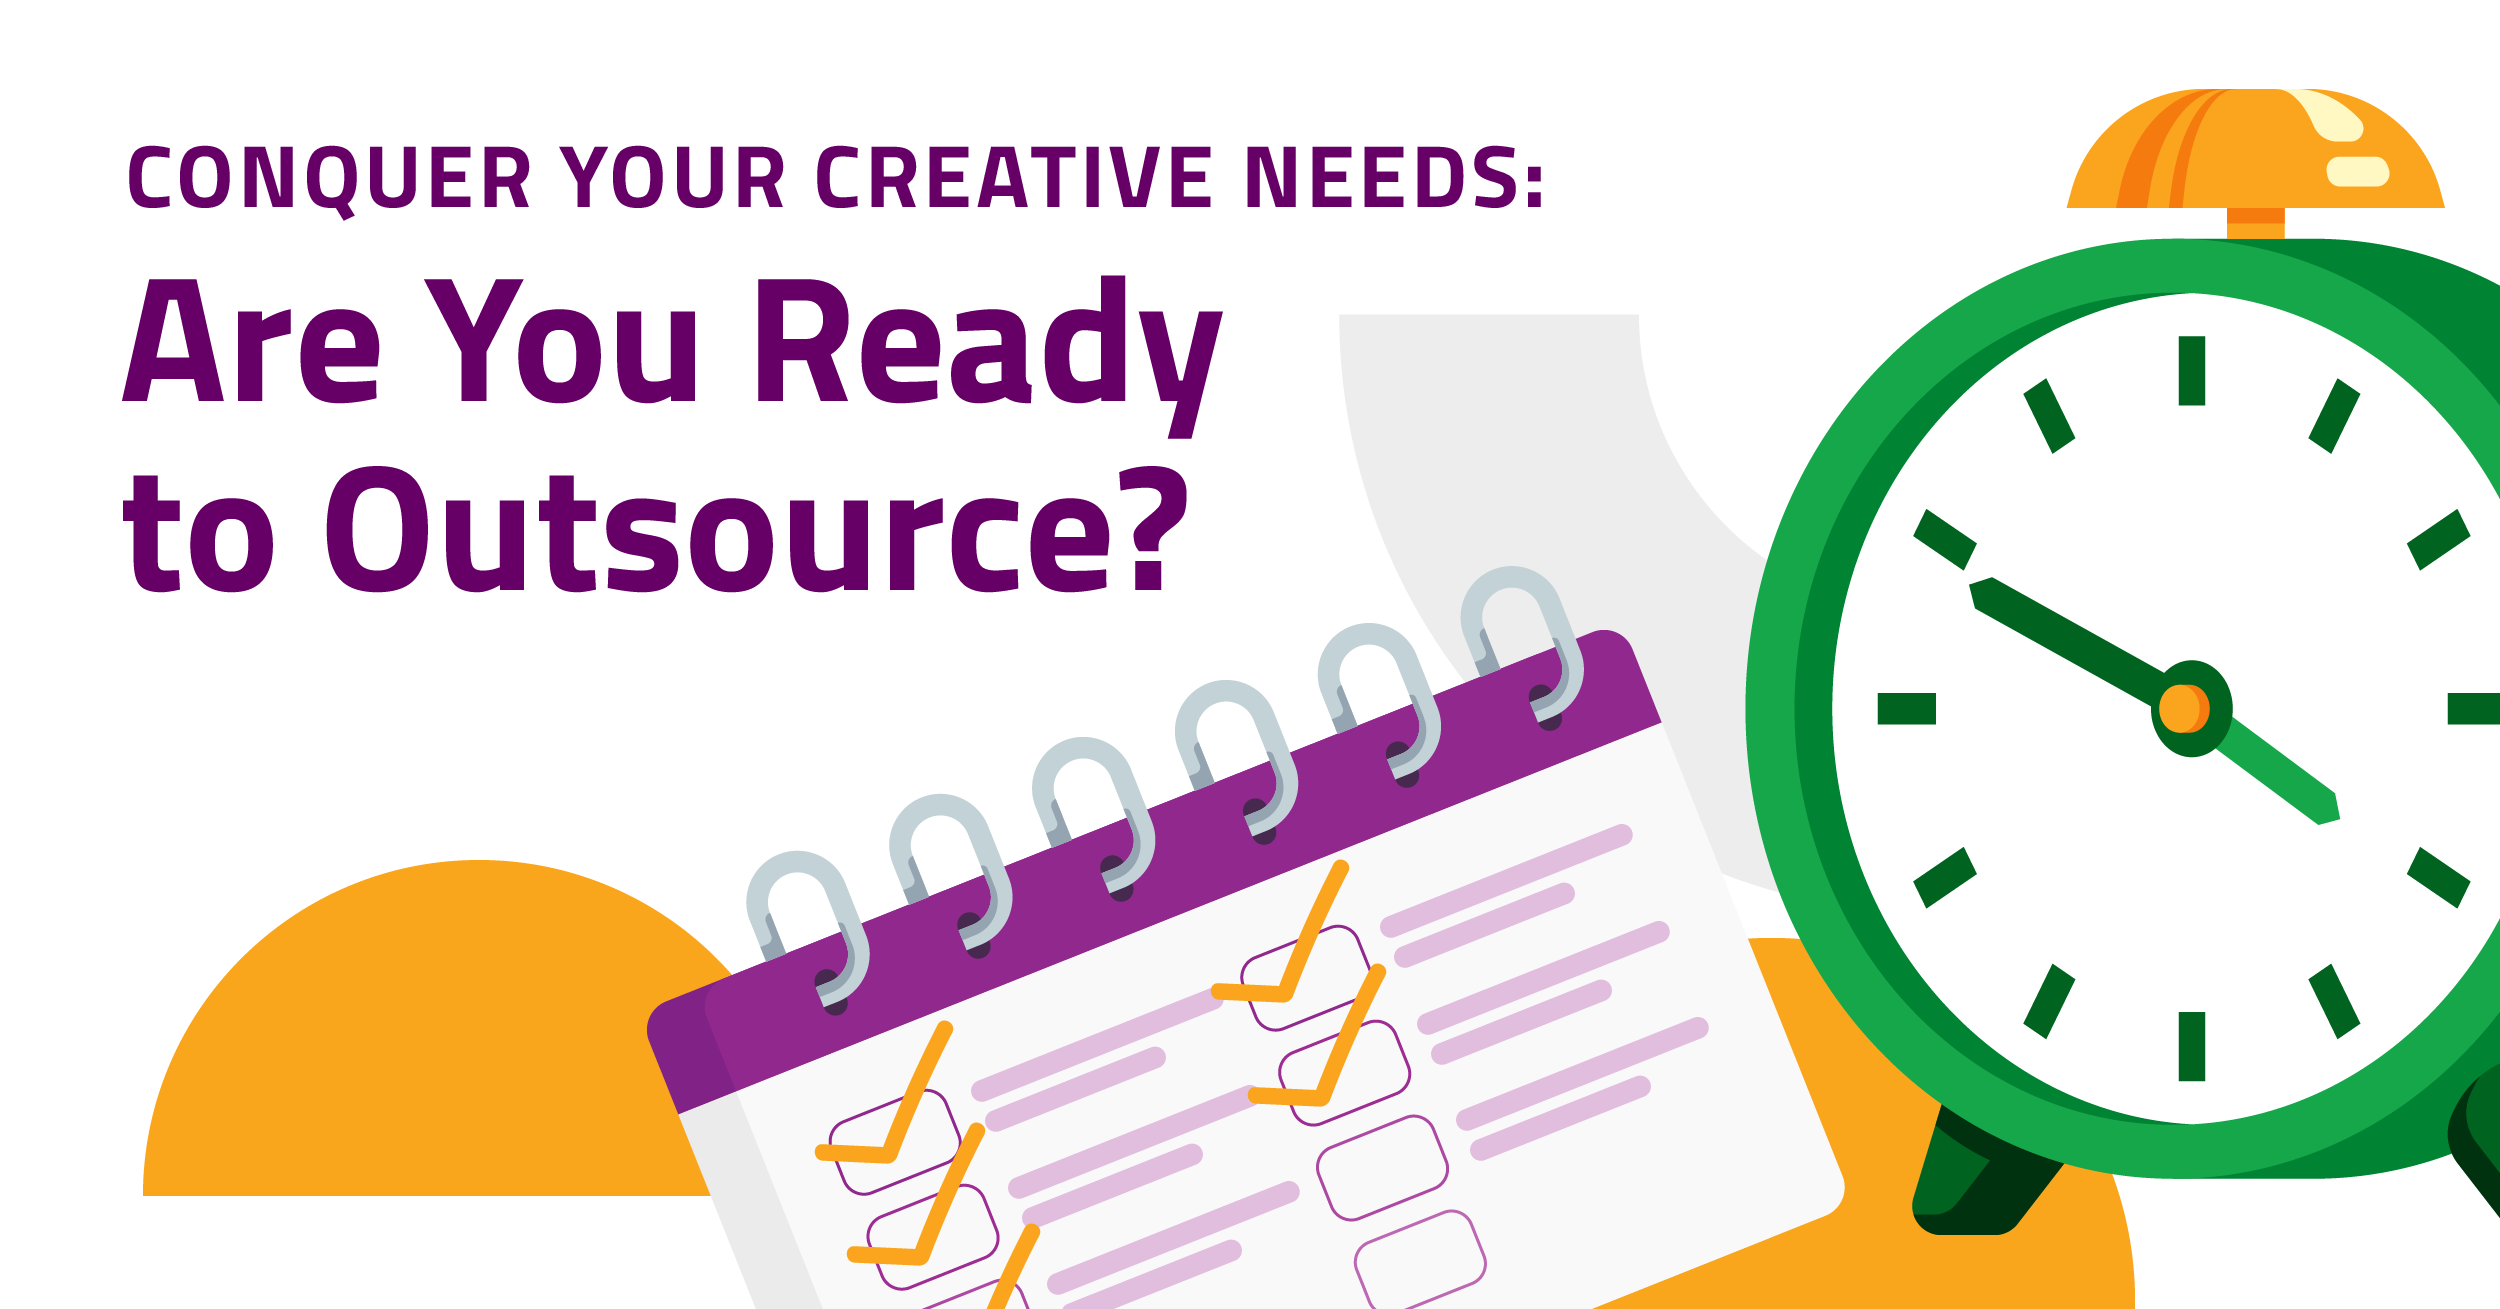 Conquer Your Creative Needs Is Your Business Ready to Outsource